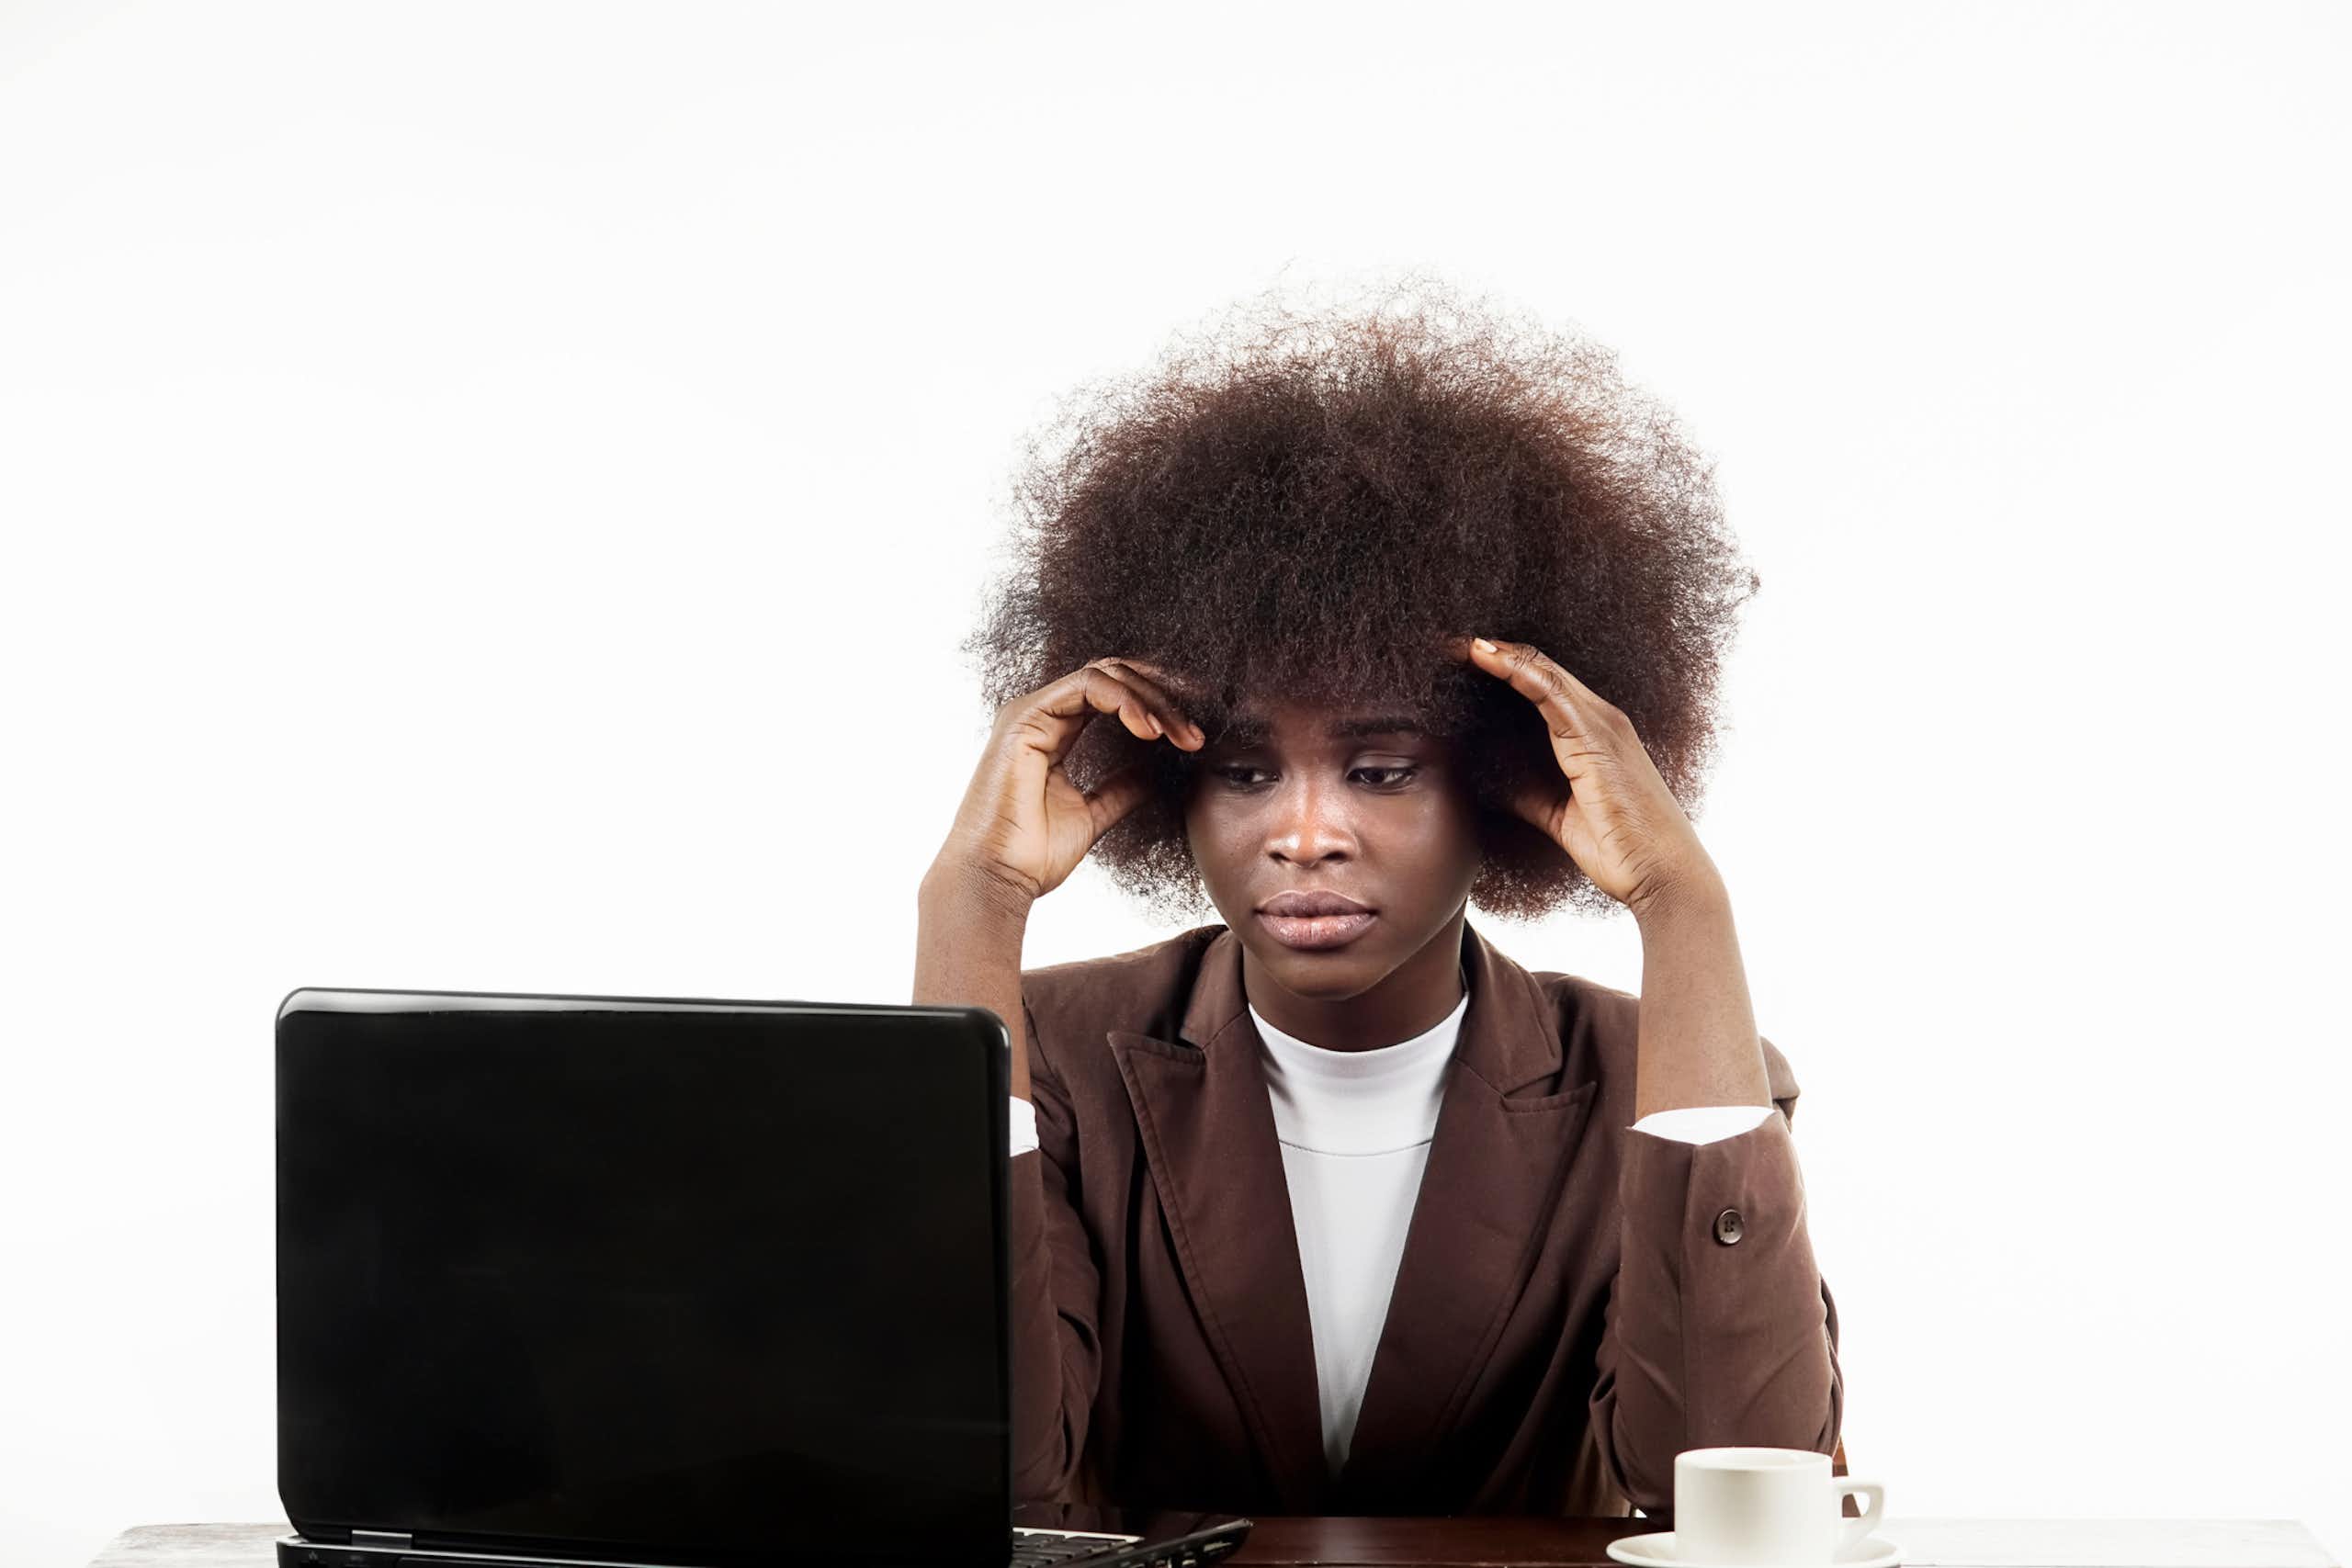 Are you sitting too long in your office job? South African study offers some health tips